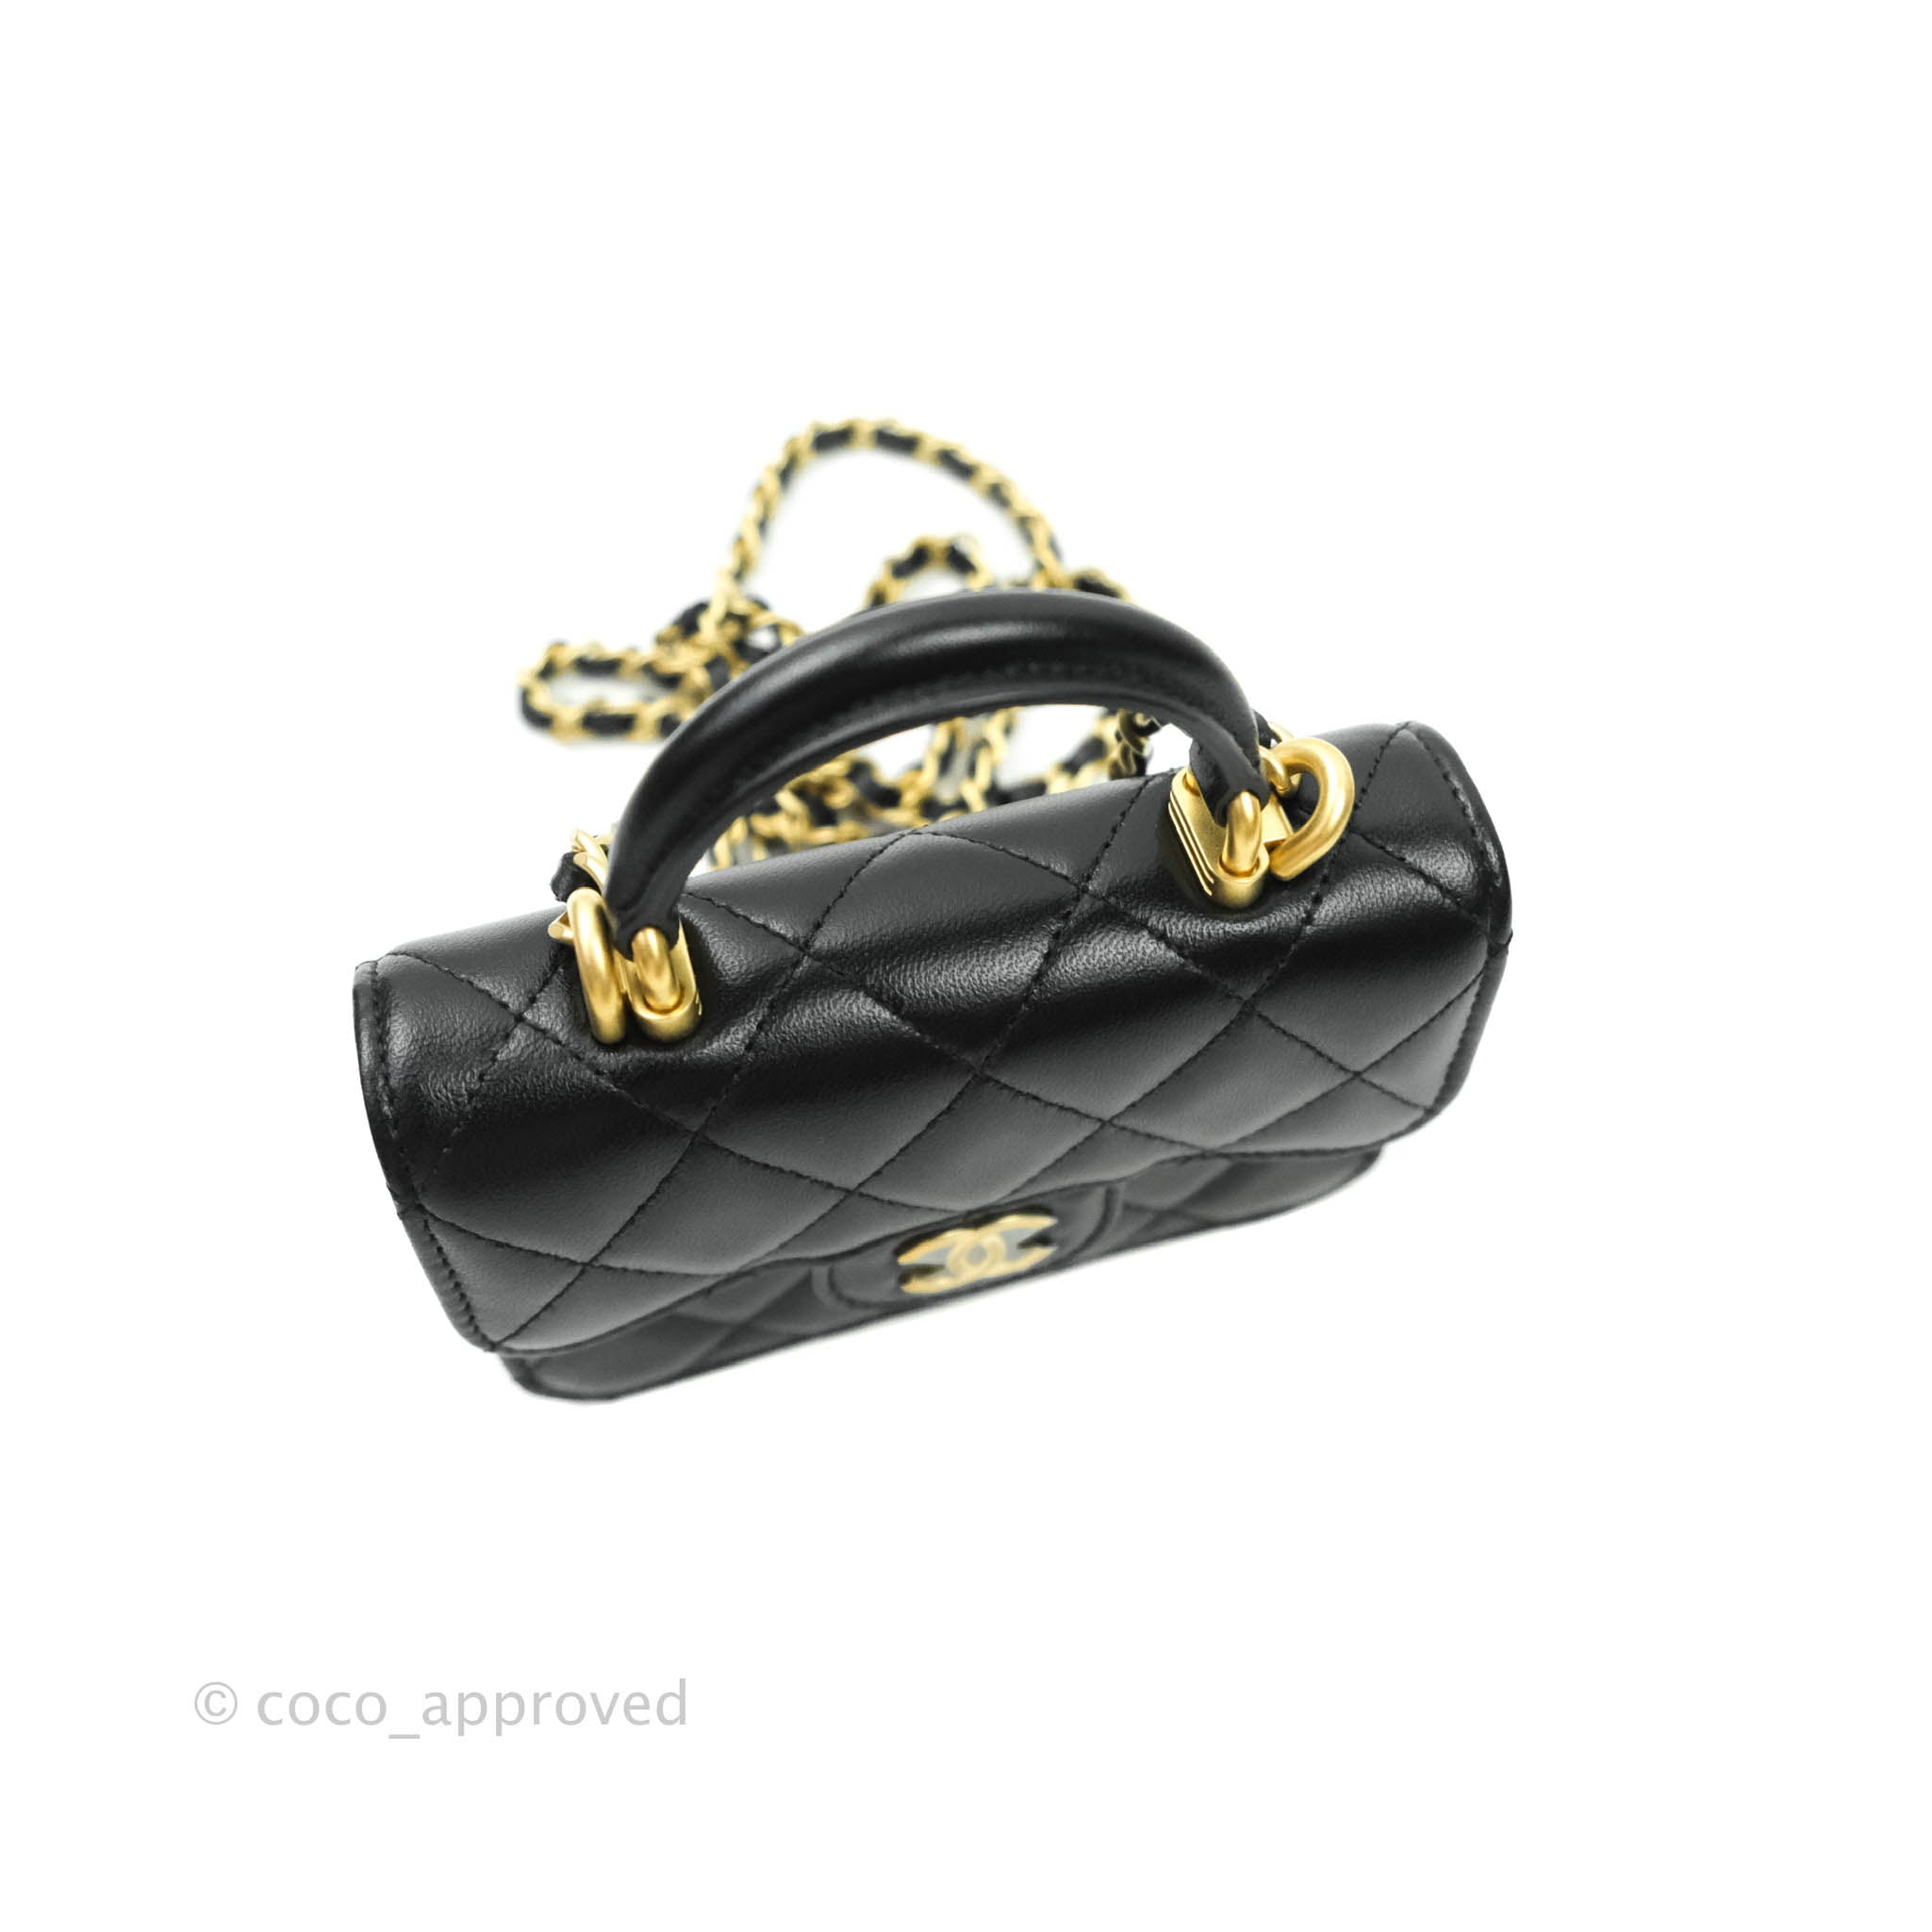 Chanel Black Quilted Lambskin Side-Pack Bags Gold and Imitation Pearl Hardware, 2019 (Like New), Blue Womens Handbag